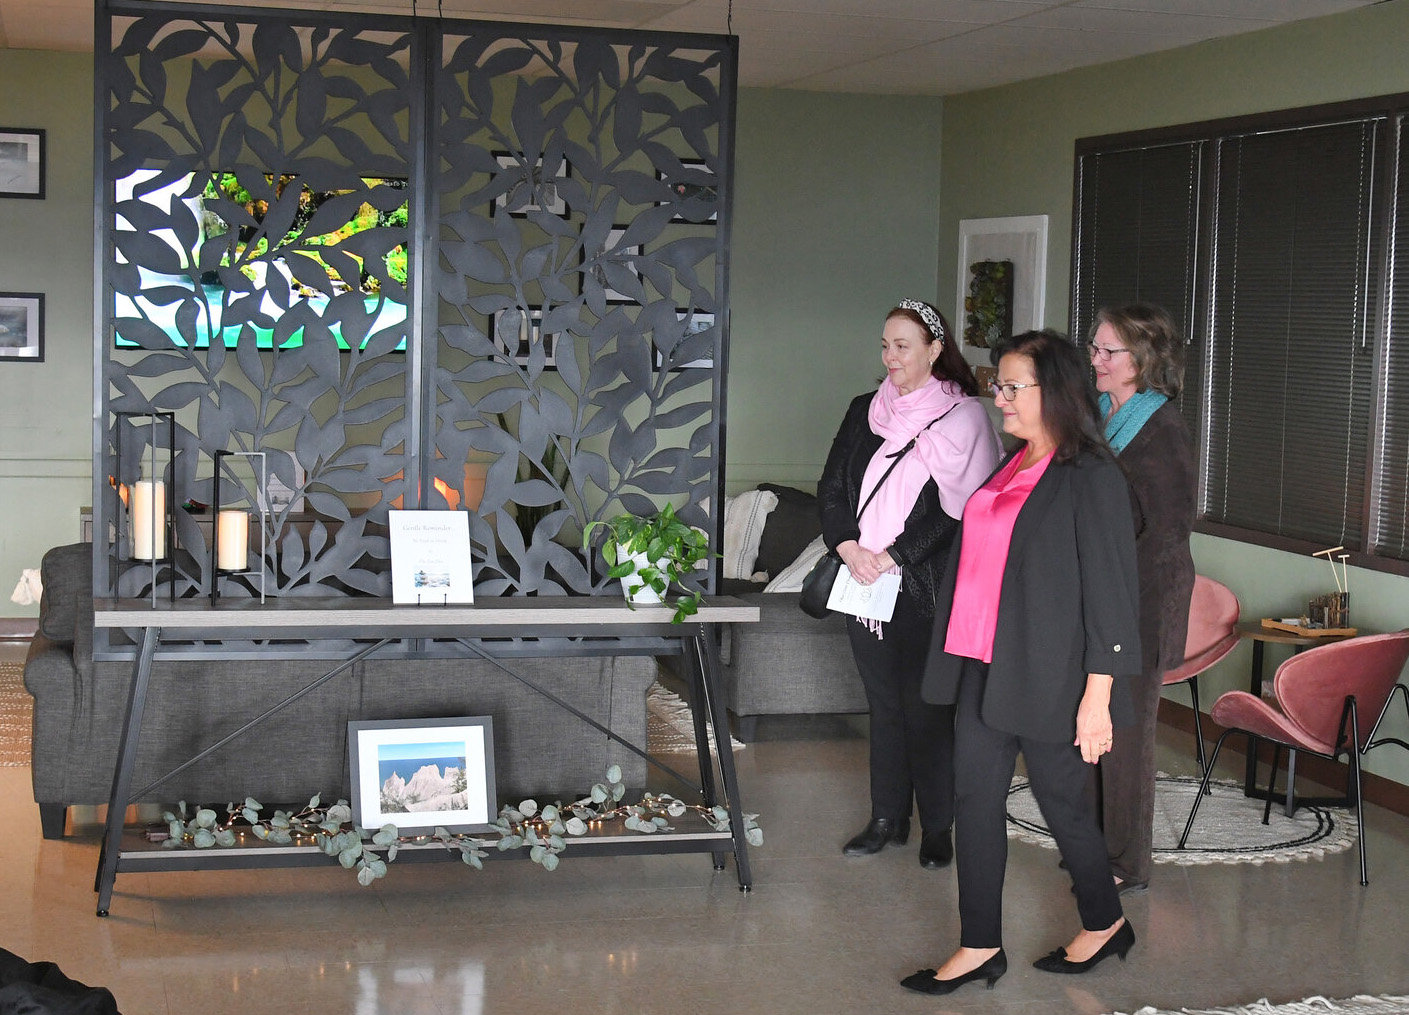 Herkimer College unveiled its new student wellness space, The Zen Den, at a ribbon-cutting ceremony on Tuesday, March 28.  From left: Dianne Stancato, CEO, YWCA of Mohawk Valley; Isabella Crandall, chairperson, board of trustees; and Cathleen McColgin, president of Herkimer College, look over some of the elements of the new wellness space for students.